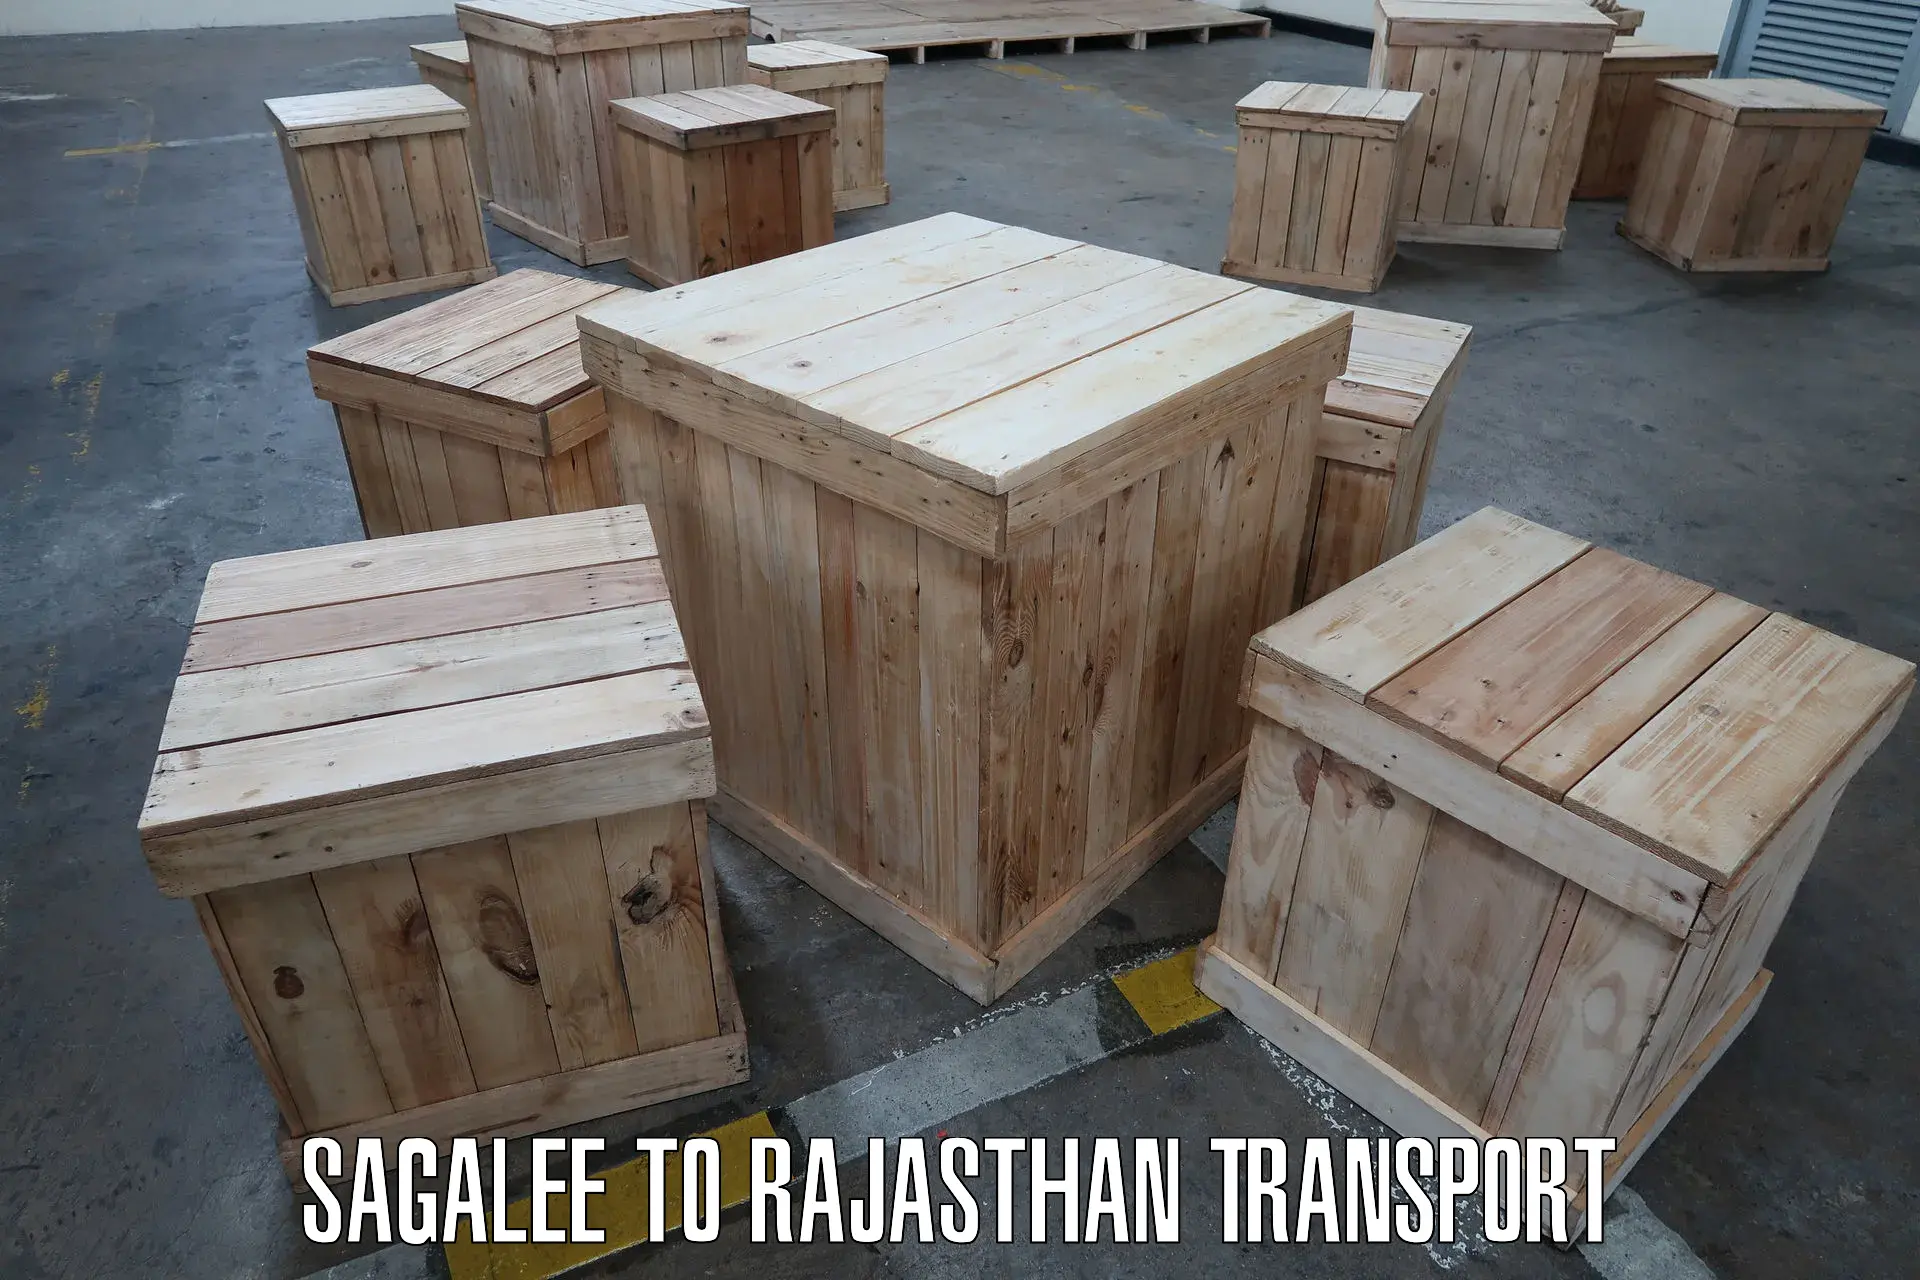 Daily transport service Sagalee to Rajasthan